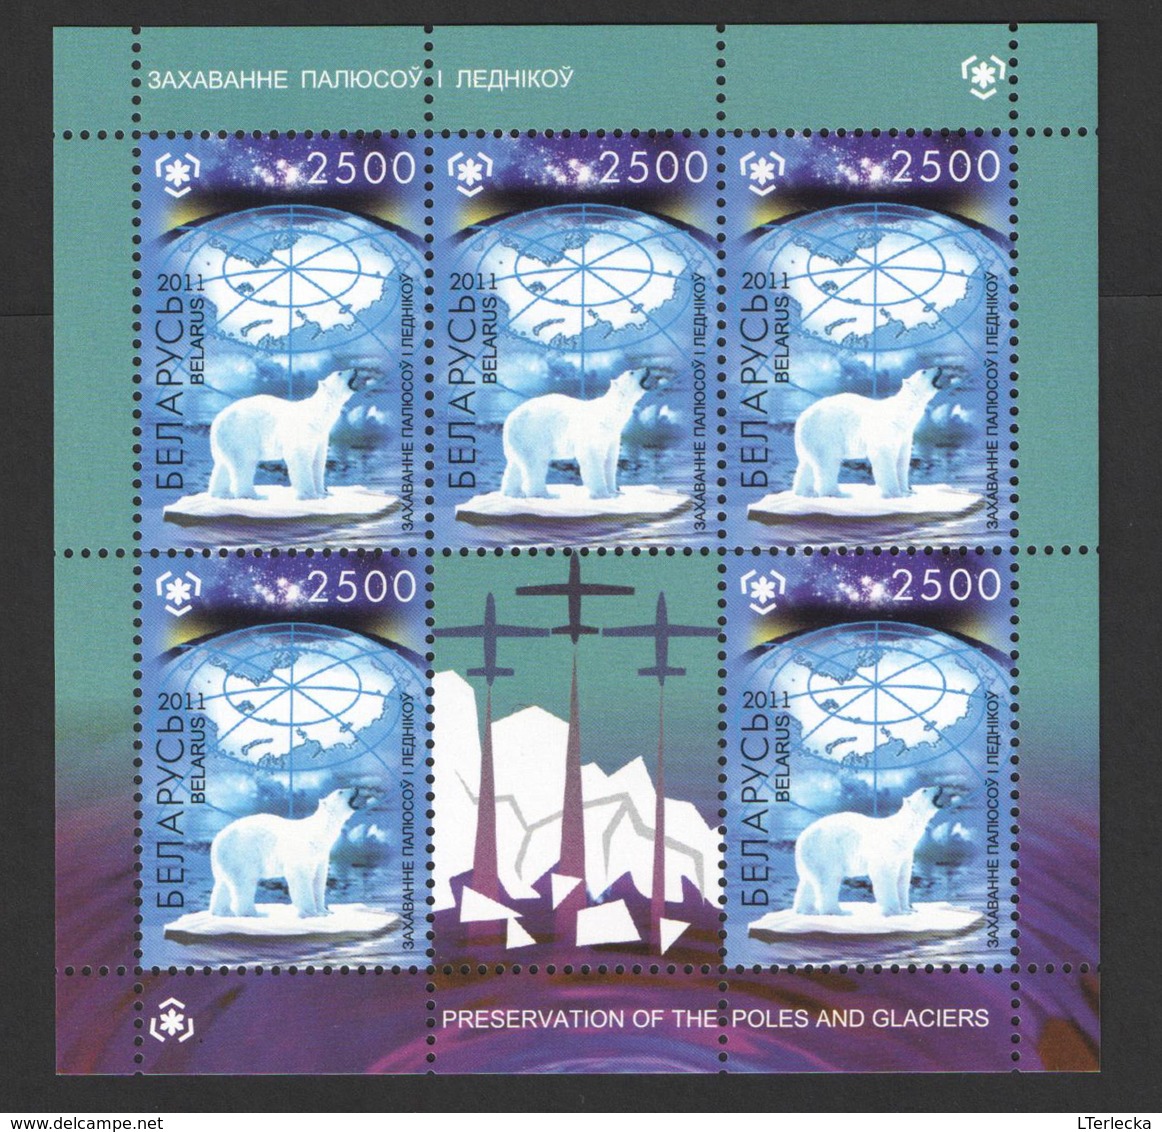 Belarus 2011 - Protection Of Polar Areas,MNH. Poles And Glaciers Polar Bear Ijsbeer Orso Polare Biélorussie/Wit-Rusland. - Preserve The Polar Regions And Glaciers